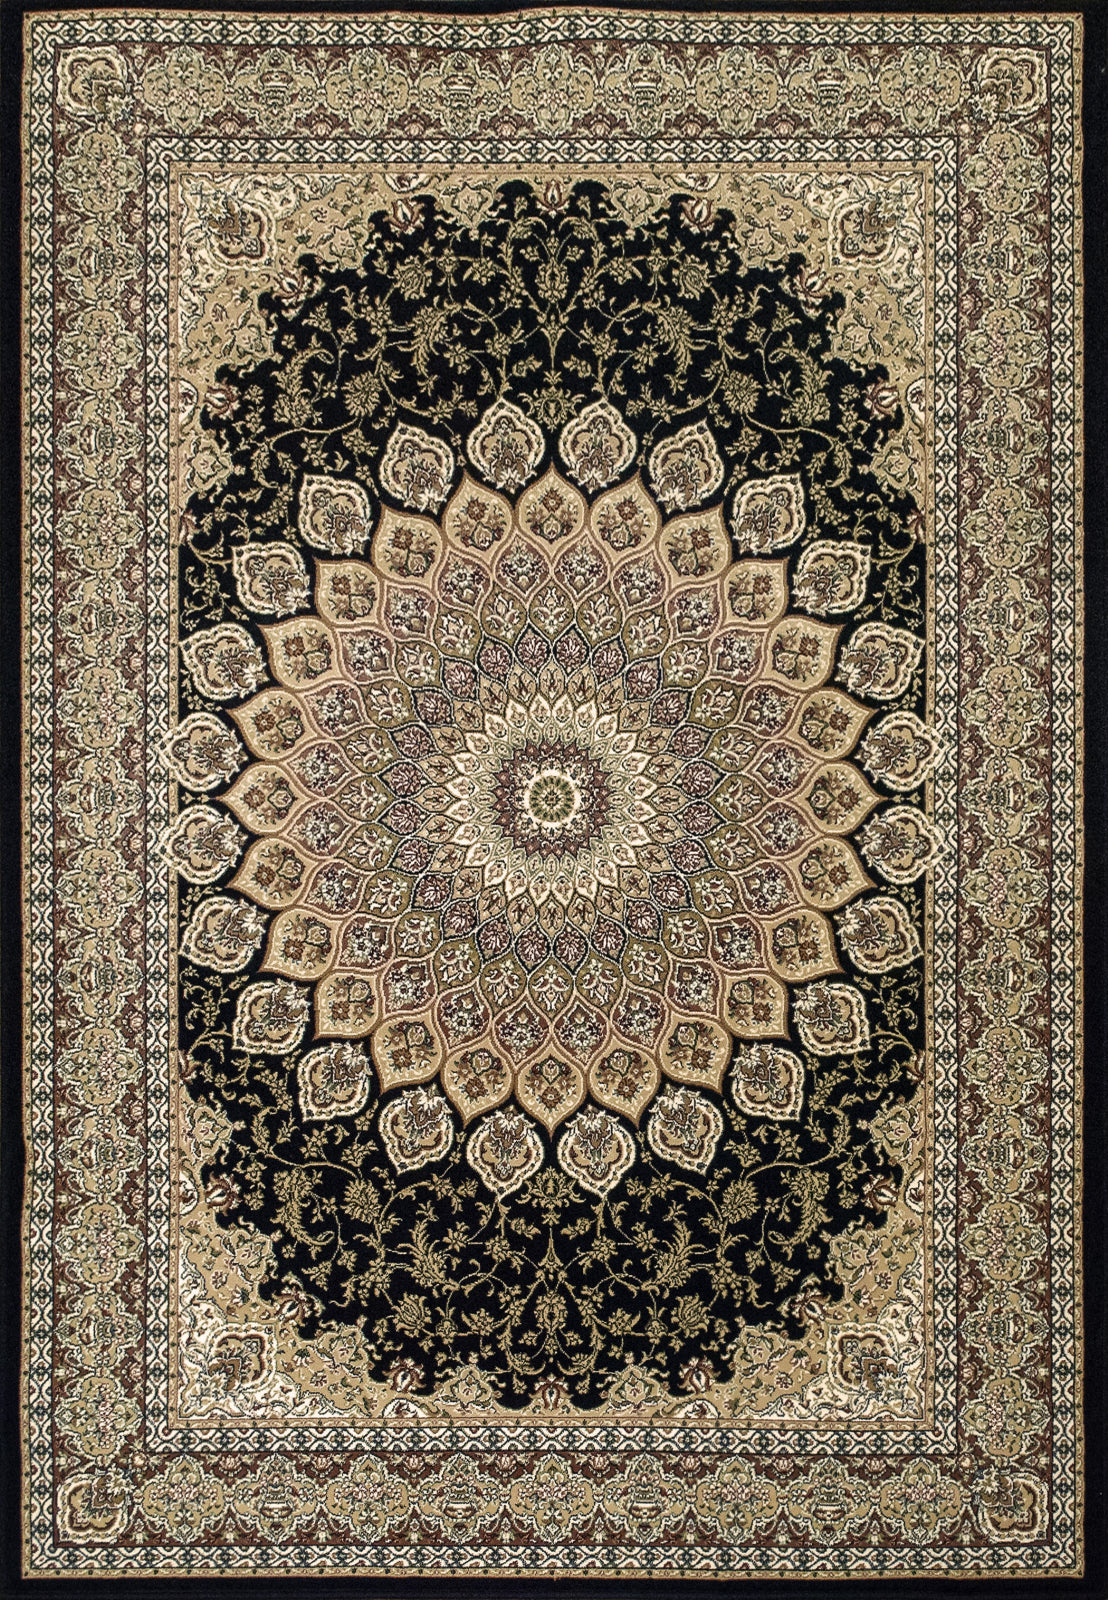 Dynamic Rugs Ancient Garden 57090 Navy Area Rug main image